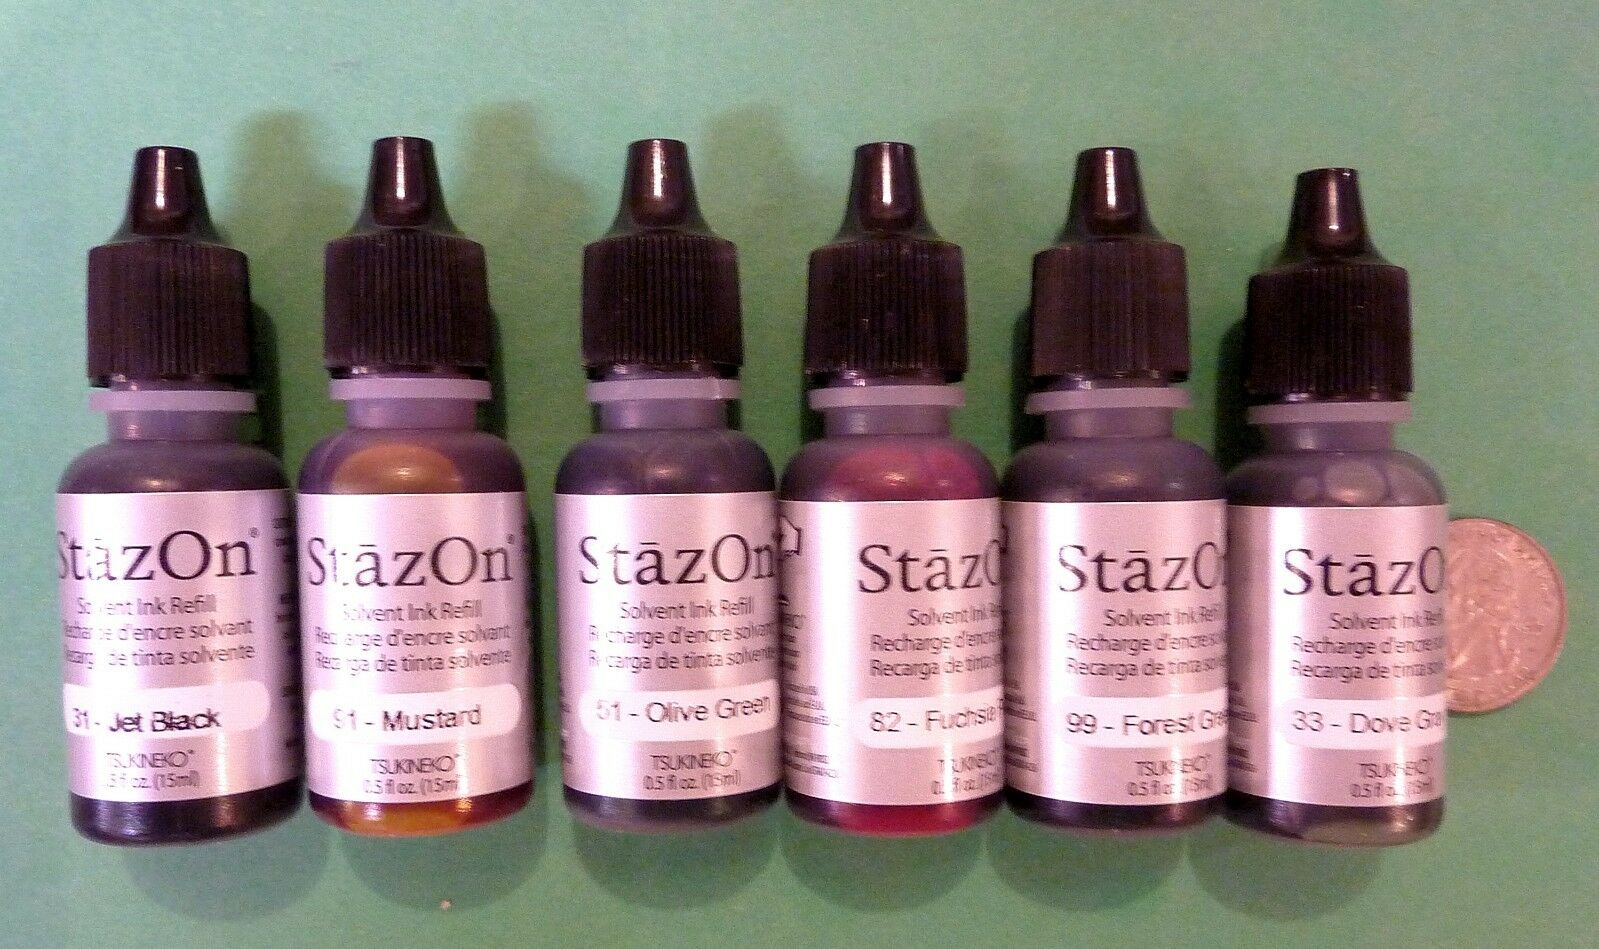 Stazon Solvent Ink Refill, 0.5 Fl. Oz. (15 Ml) - Your Choice Of Color